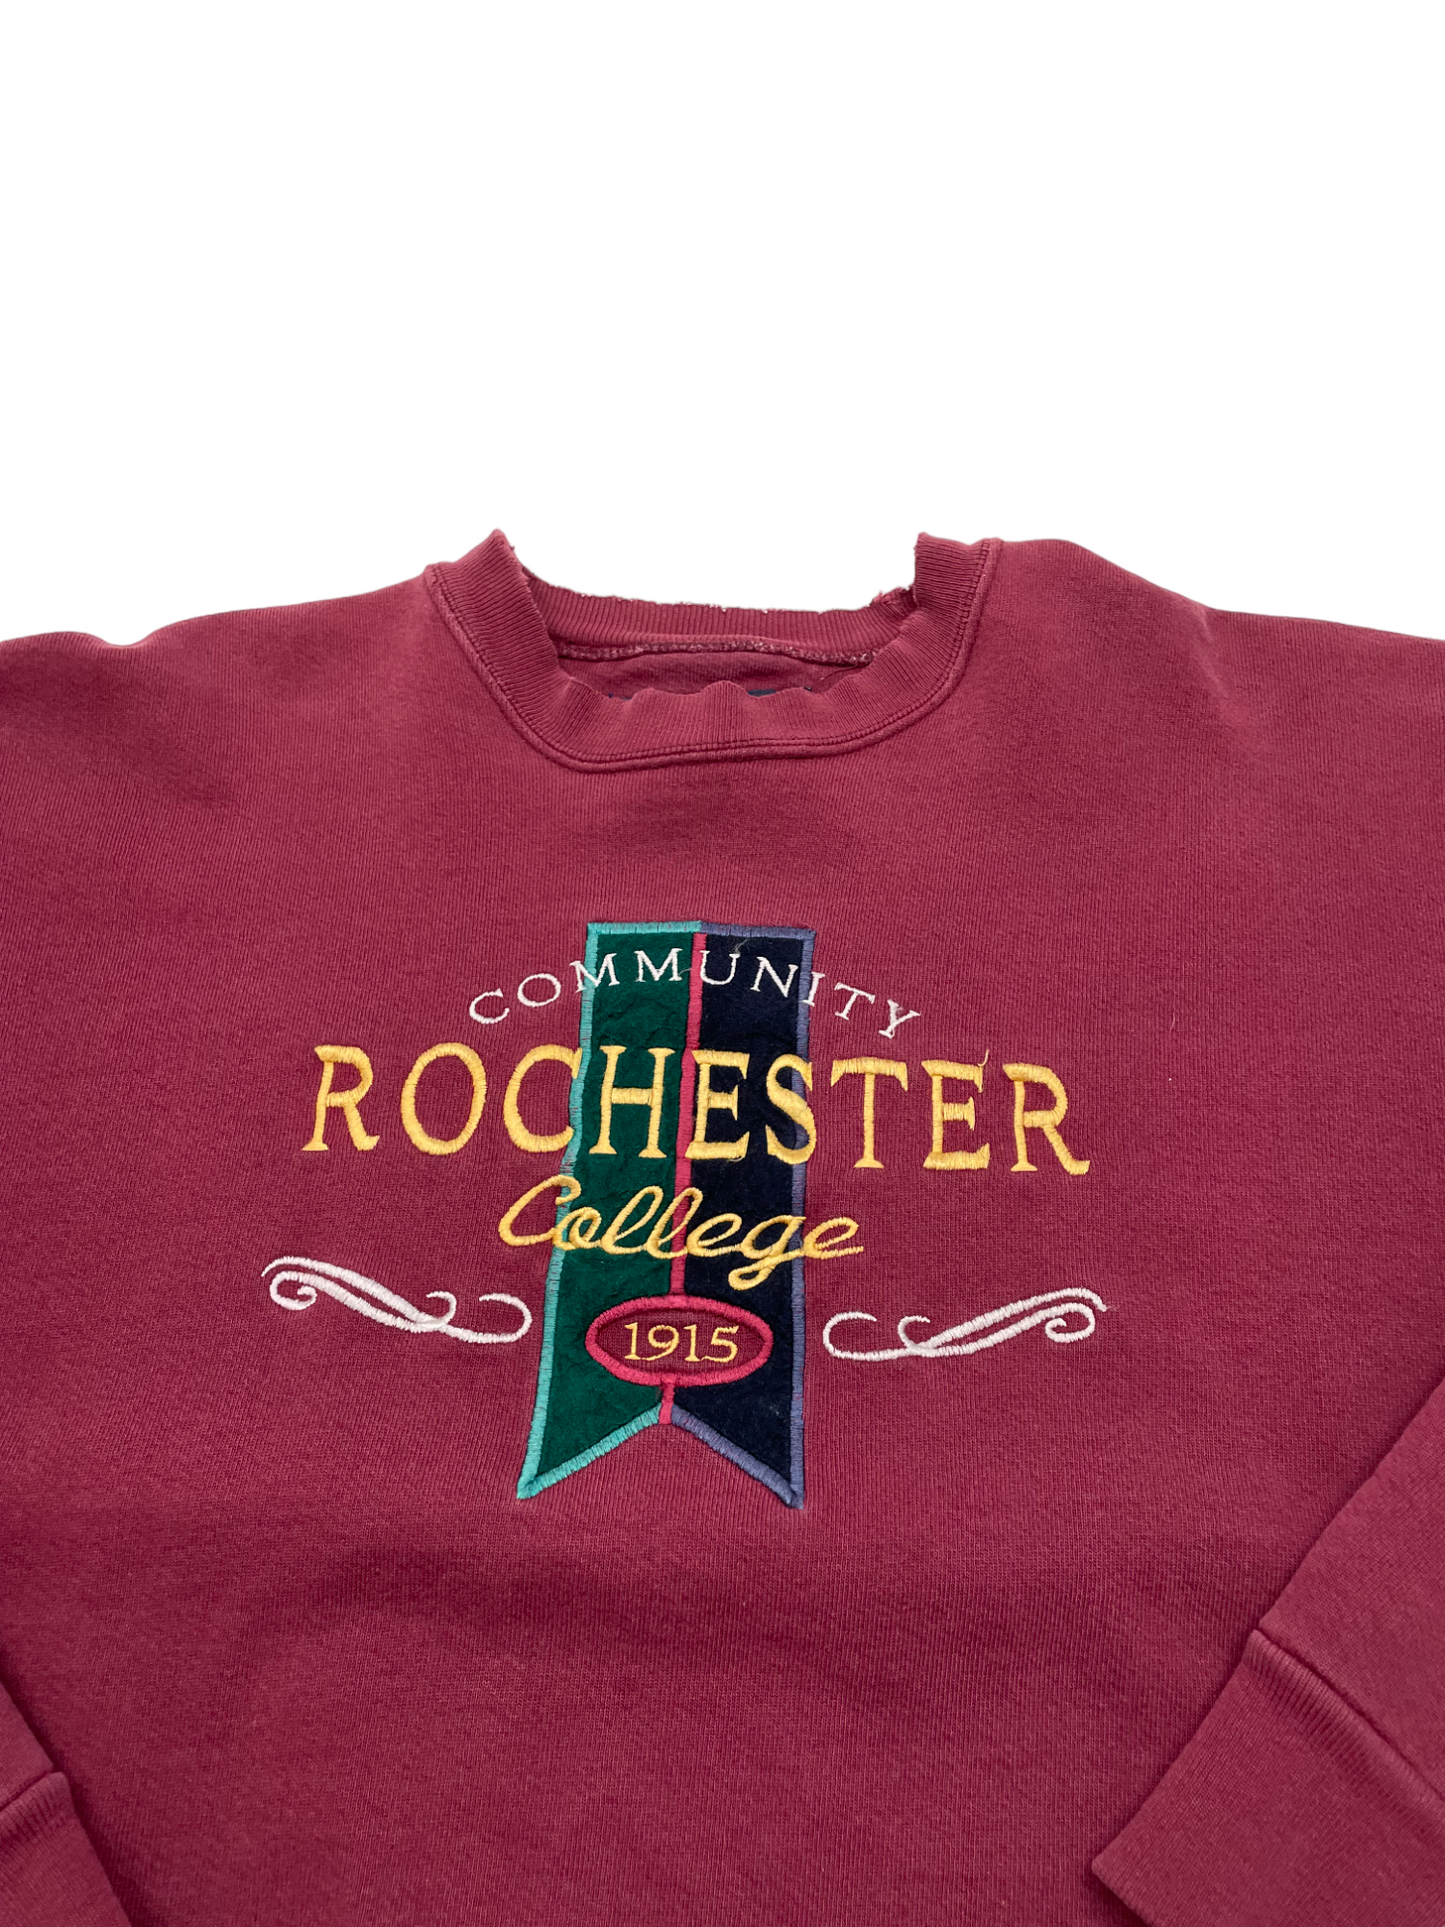 Community Rochester College Red Crewneck